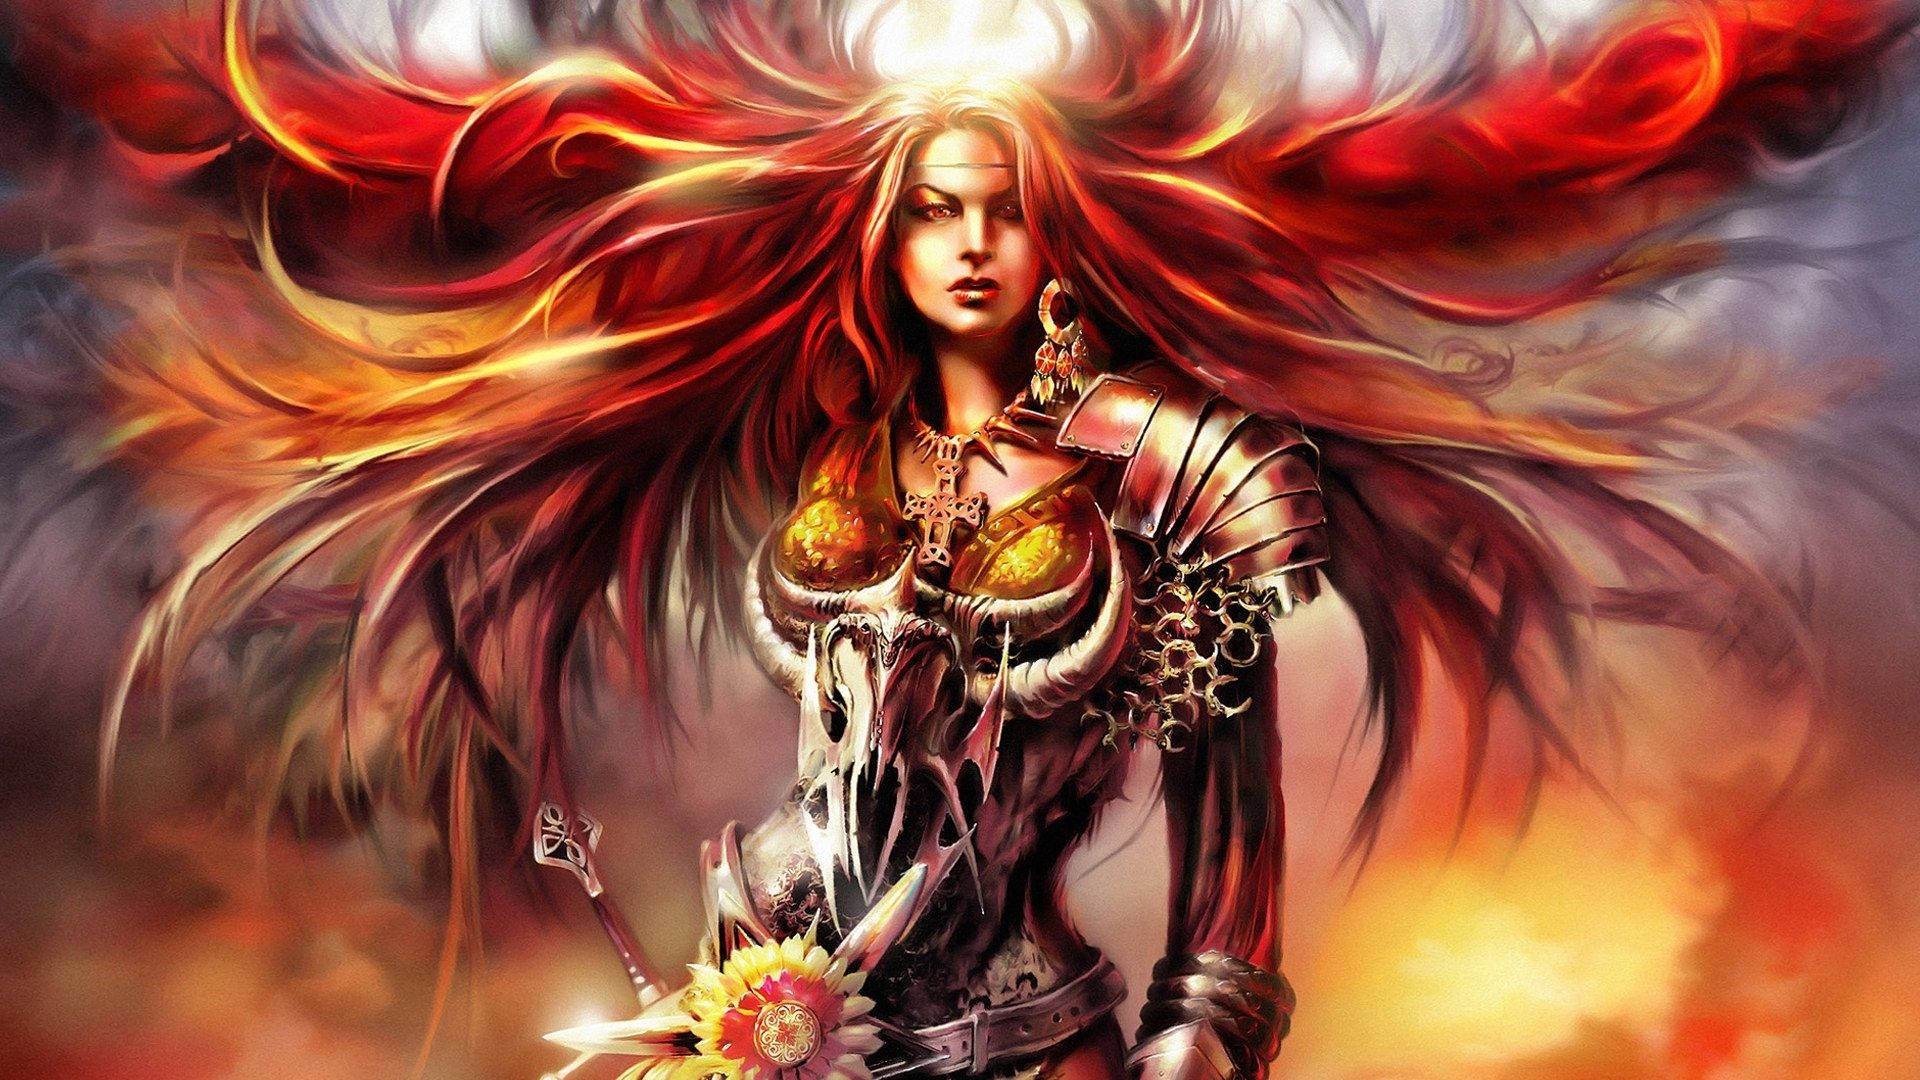 Fire Girl In Metal Armor Background